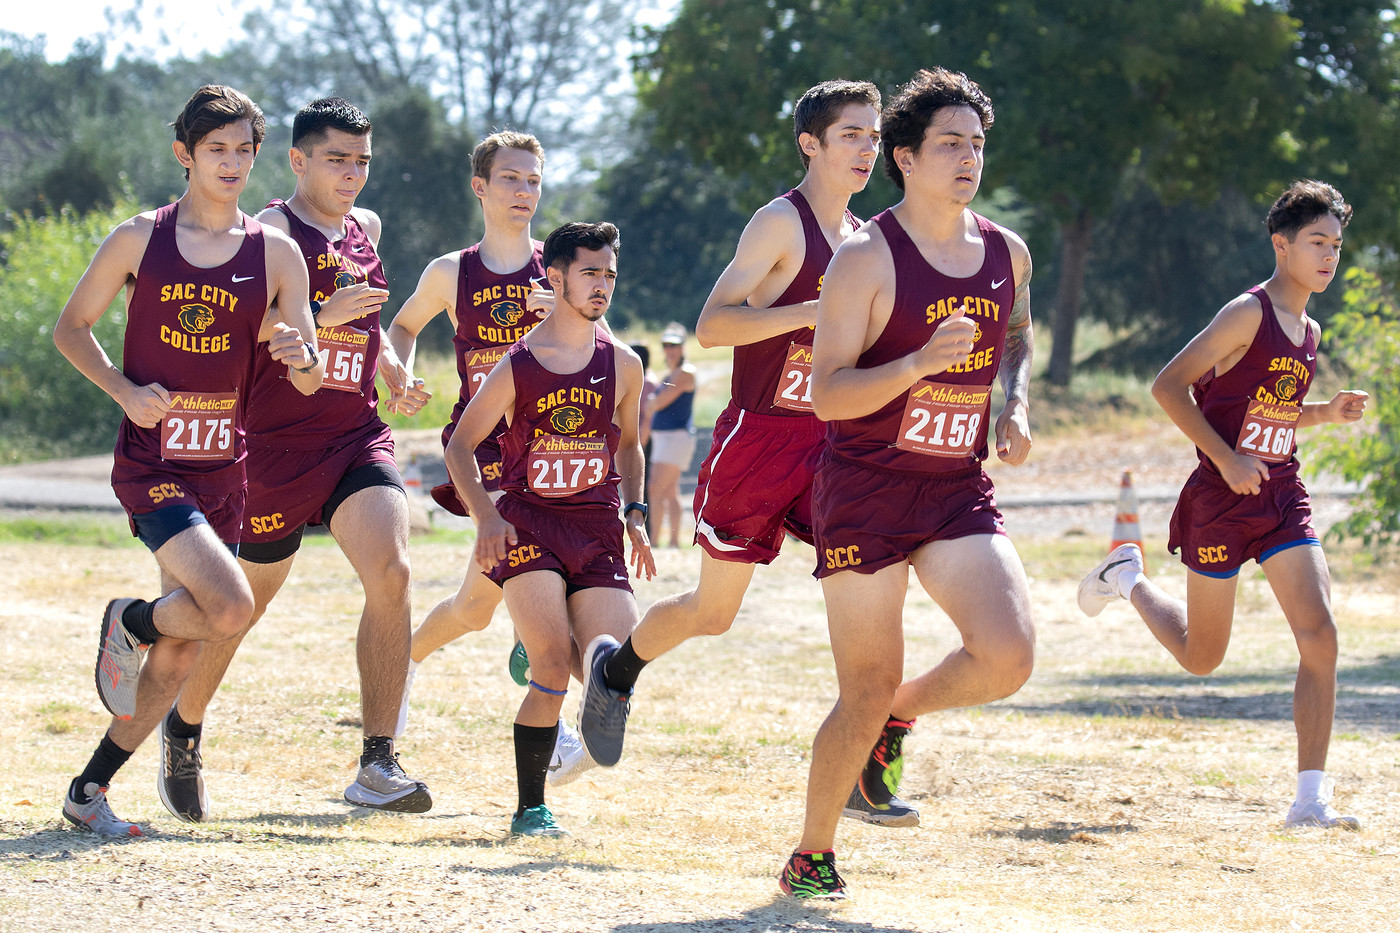 City finishes 13th at the Nor-Cal Preview/George Brooks Invitational and is led by York's time of 25:05.5